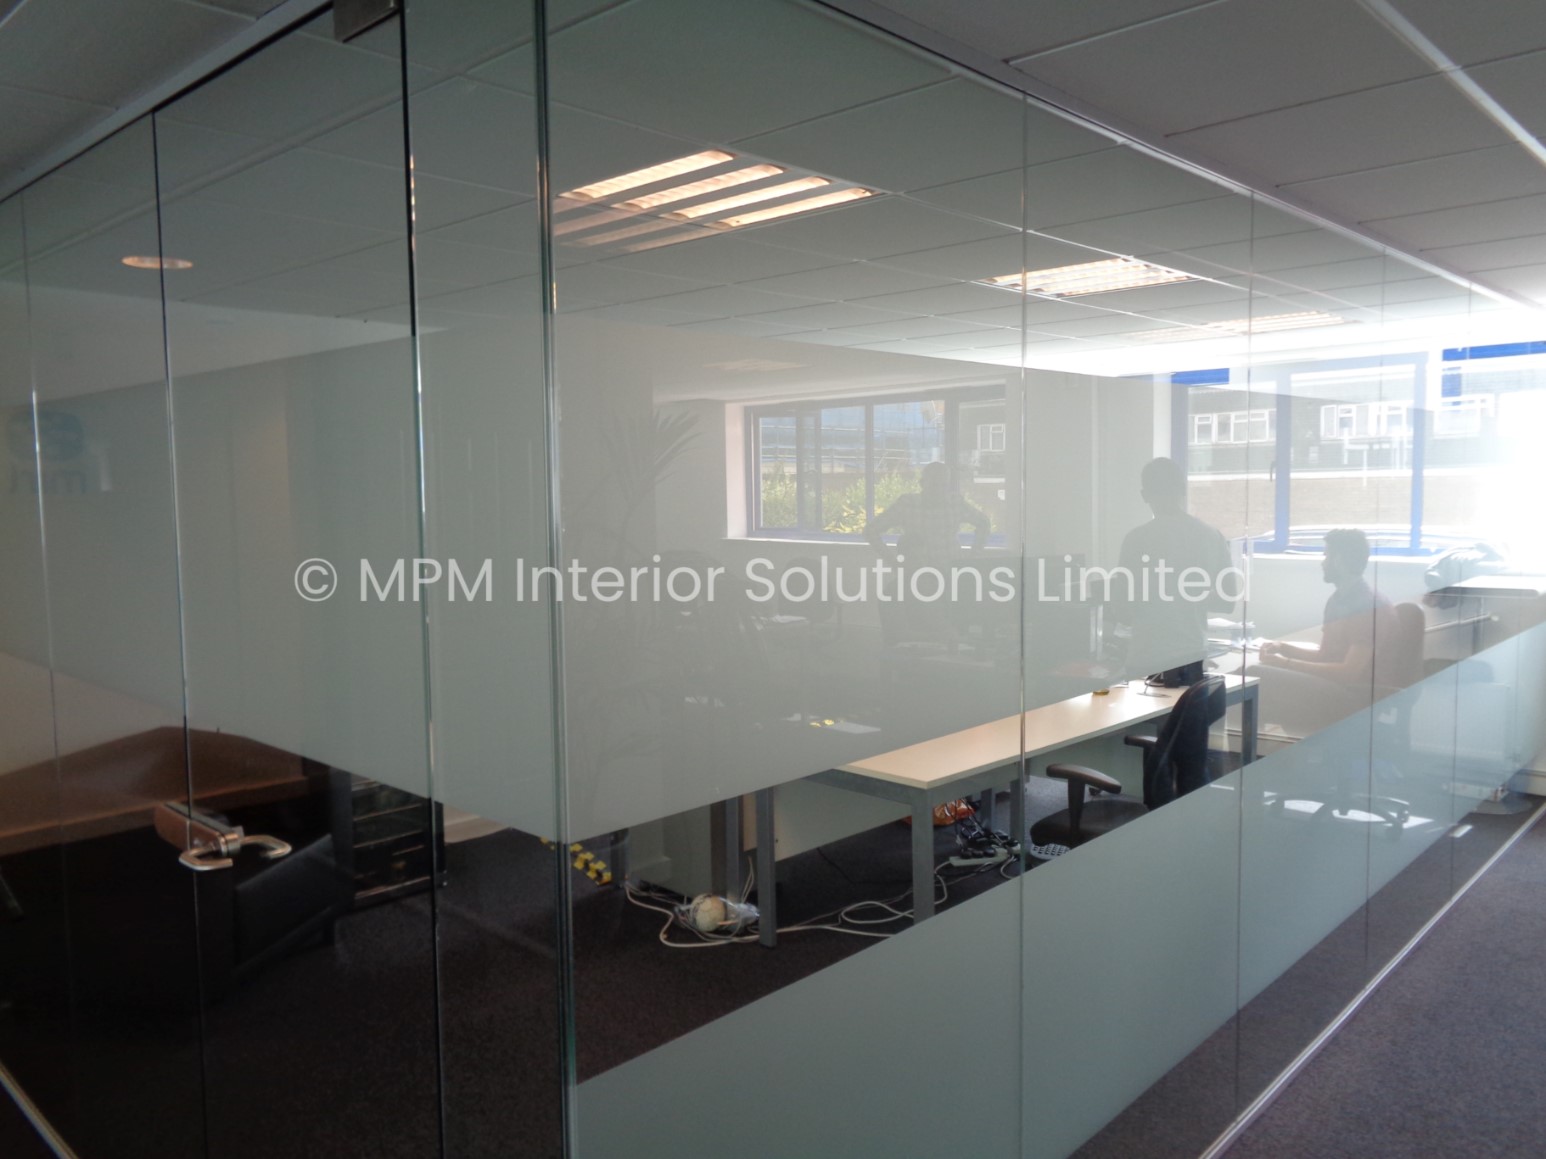 Frameless Glass Office Partitioning, 75mm > 100mm Demountable Office Partitioning, Office Refurbishment/Fit-Out, MRL Consulting Group Ltd (Hove, East Sussex), MPM Interior Solutions Limited